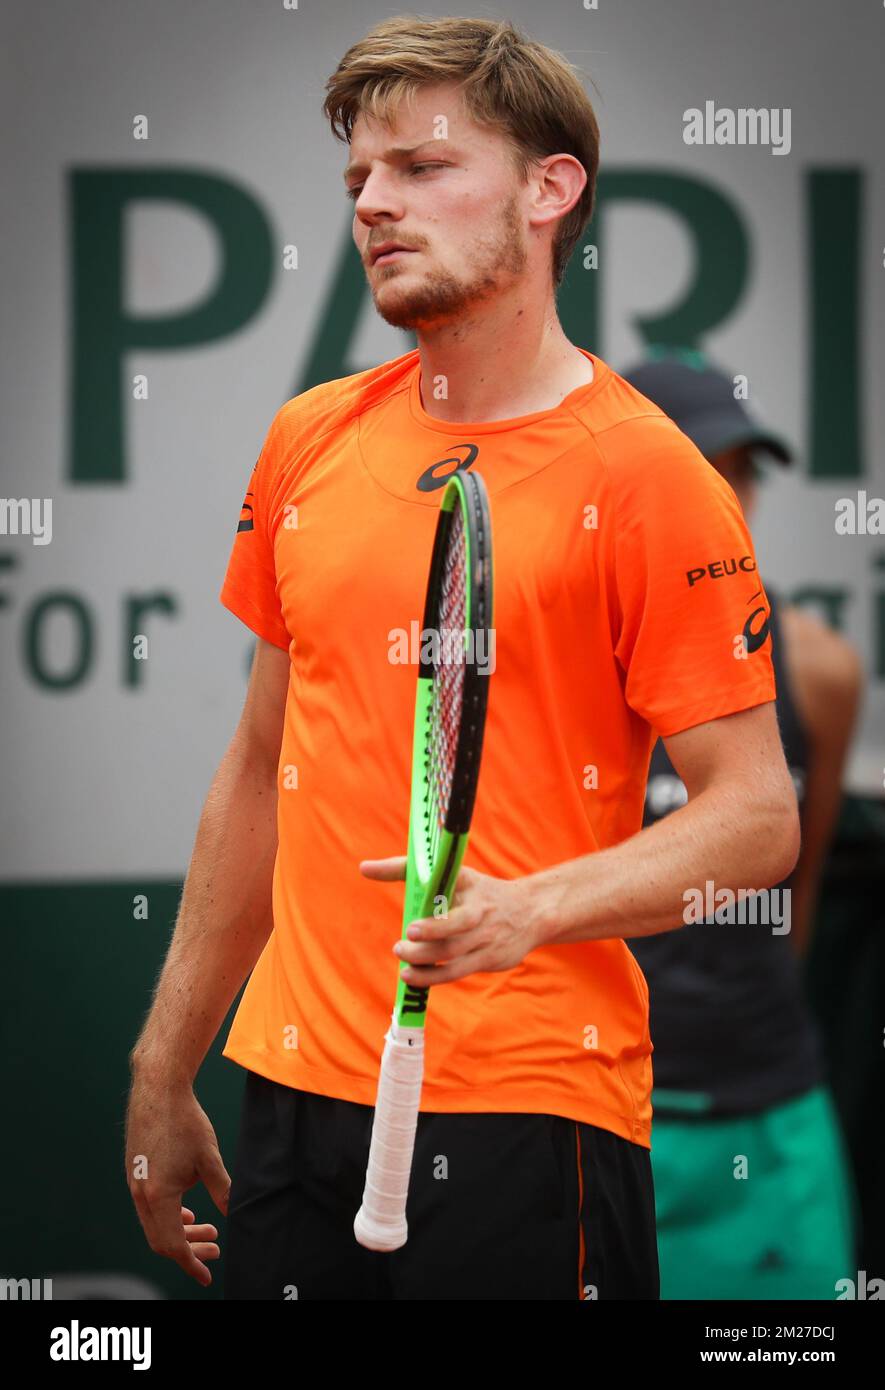 Belgian David Goffin (ATP 12) pictured during a tennis game against French Paul-Henri Mathieu (ATP 120), in the first round of the men's tournament at the Roland Garros French Open tennis tournament, in Paris, France, Monday 29 May 2017. The main table Roland Garros Grand Slam takes place from 29 May to 11 June 2017. BELGA PHOTO VIRGINIE LEFOUR Stock Photo